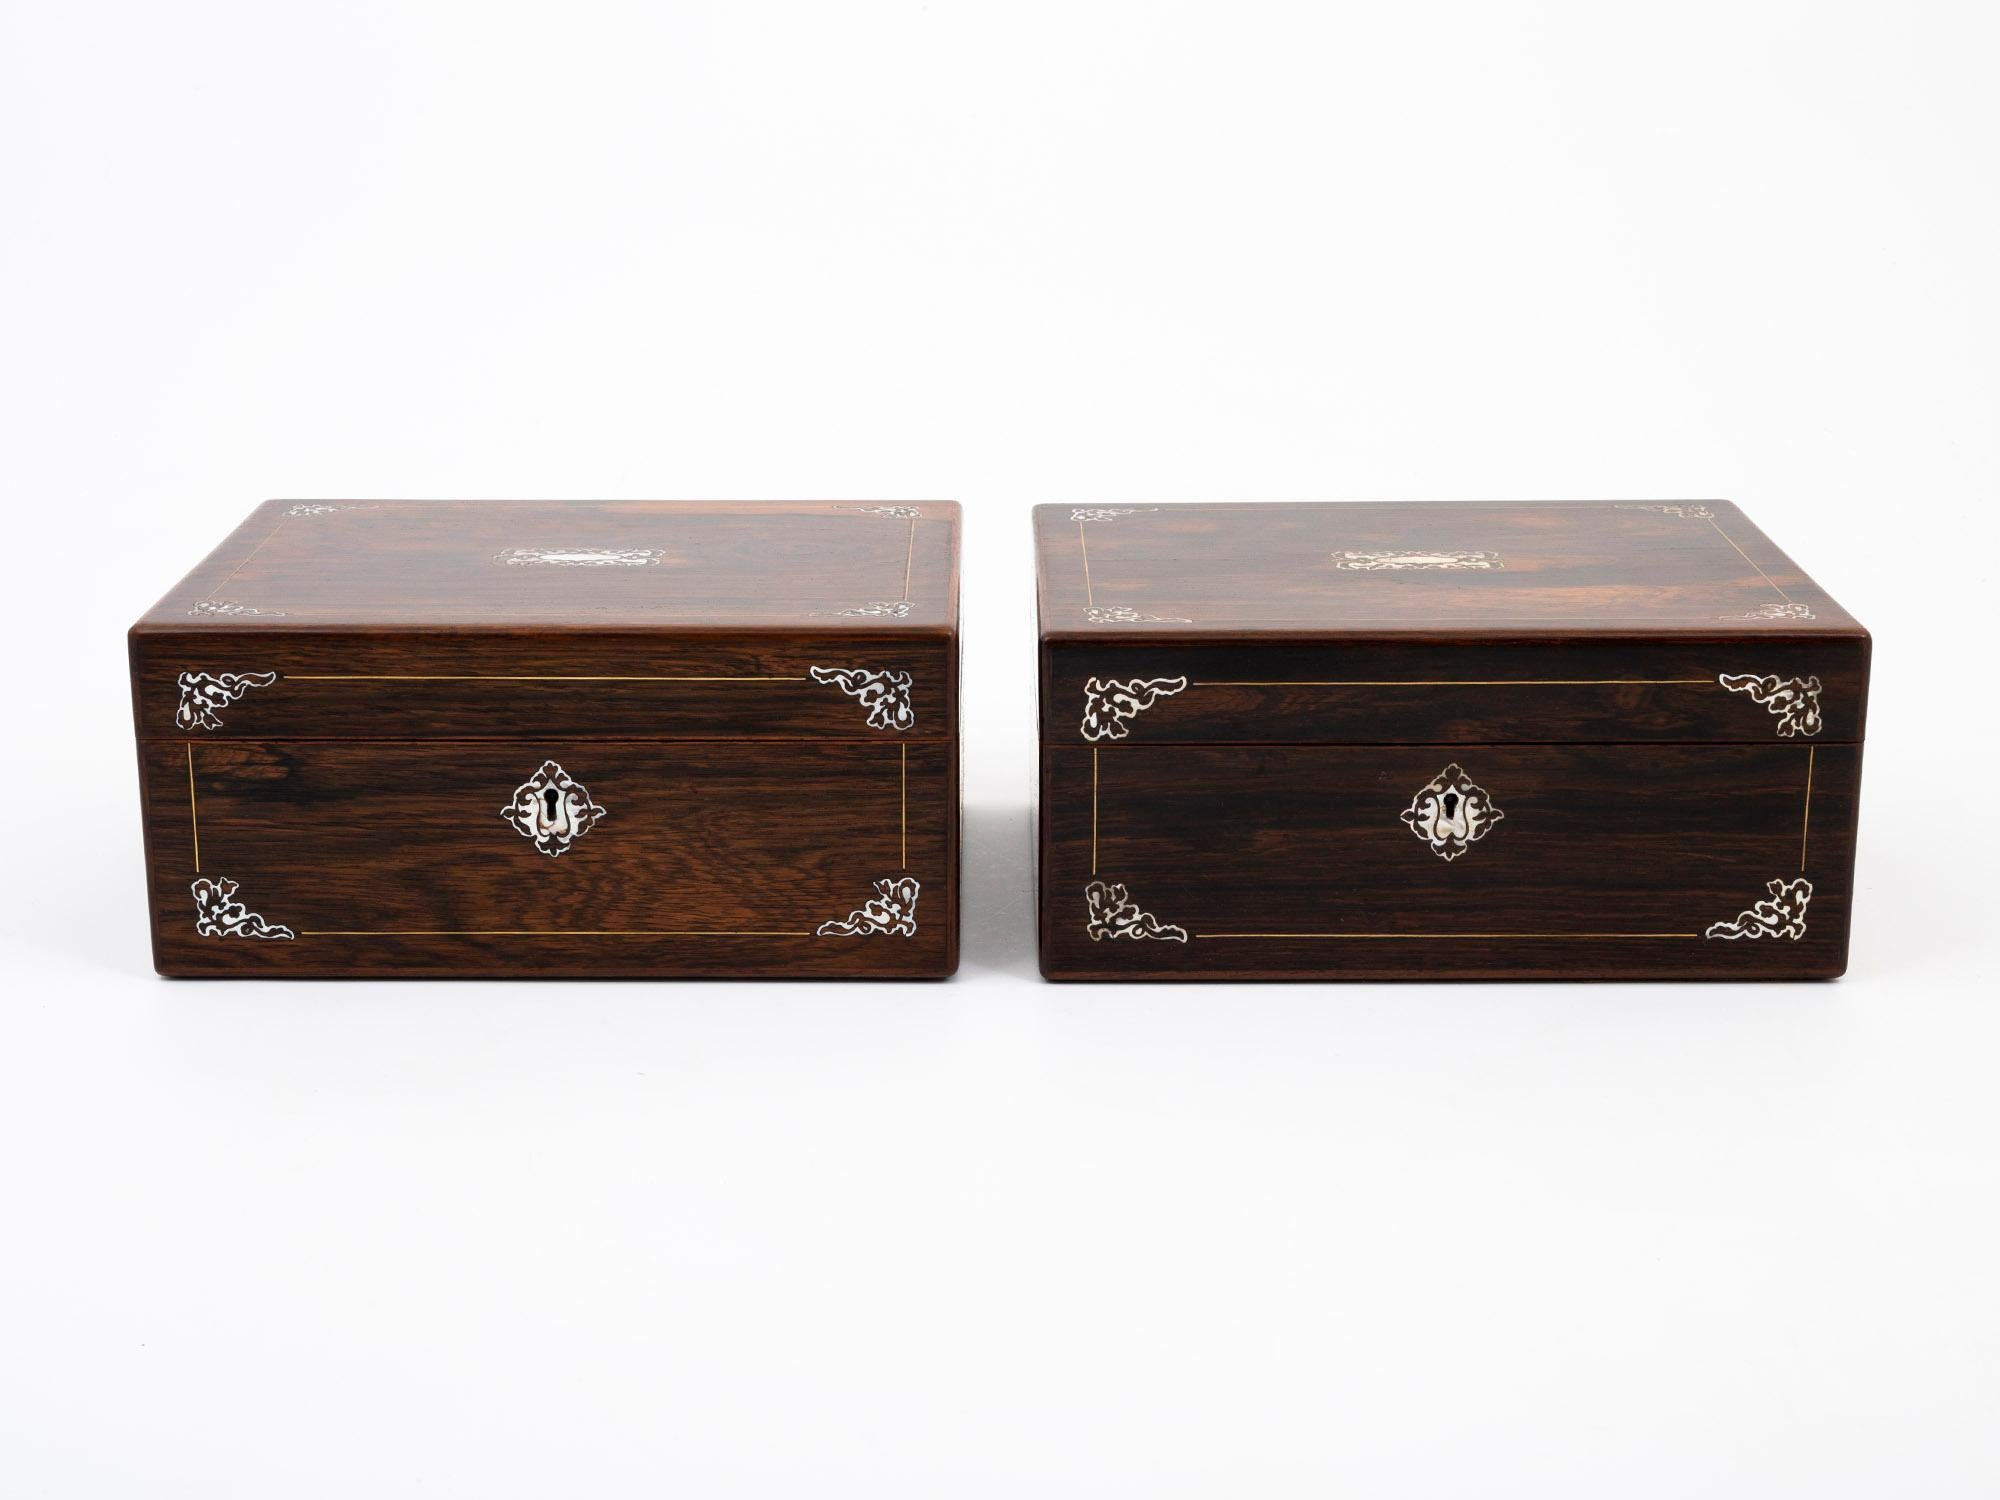 Rosewood and Mother of Pearl

From our Sewing Box collection, we are thrilled to offer this pair of Georgian Rosewood Sewing Boxes. The Sewing Boxes of rectangular shape veneered in figured Rosewood. The Sewing Boxes a mirror of one another with